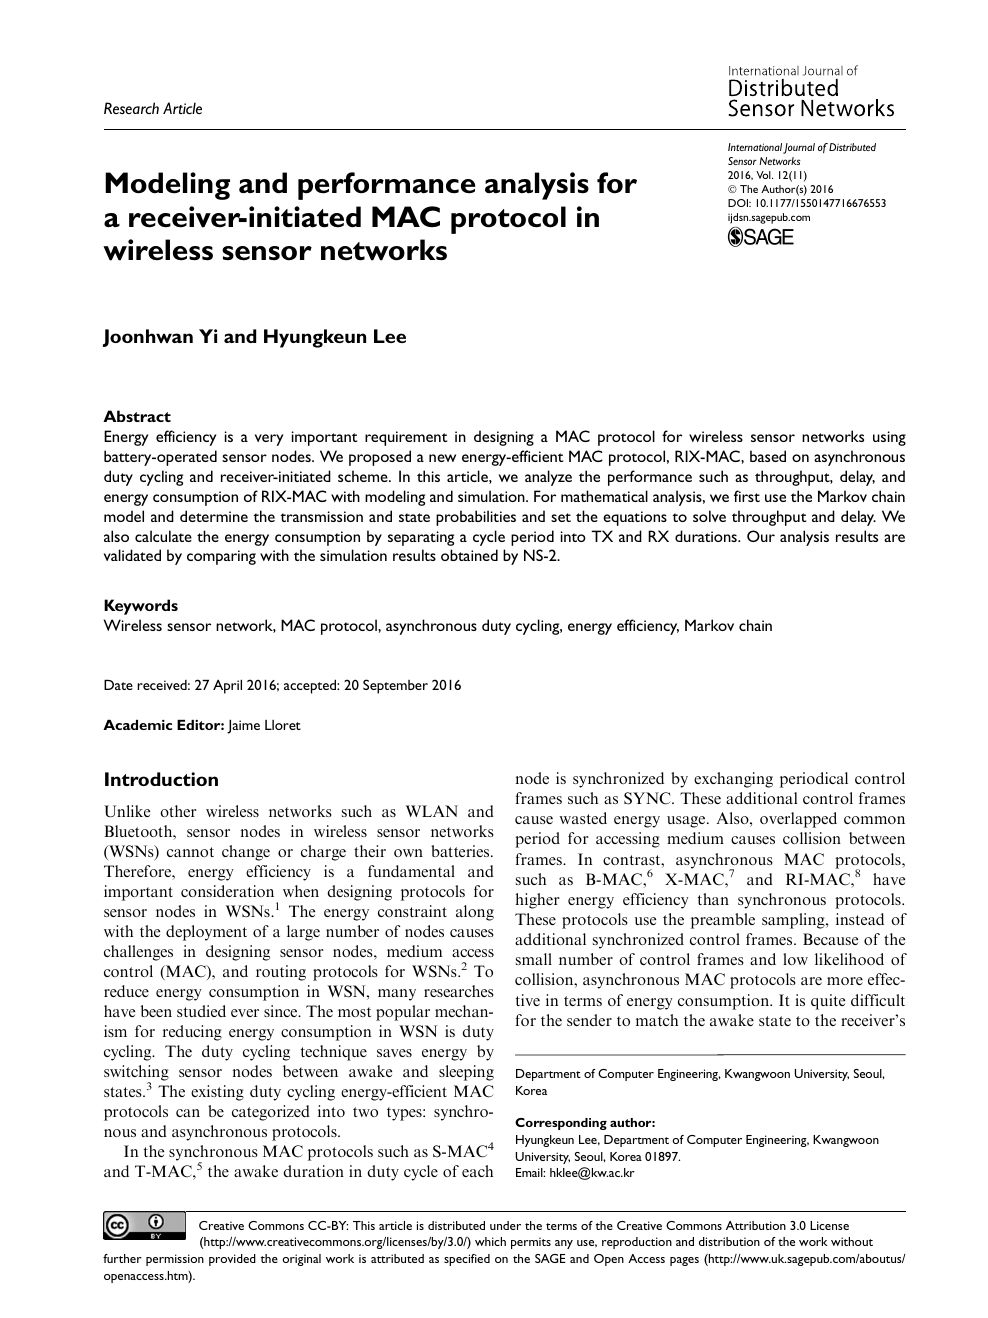 performance modeling of receiver initiated mac protocol for wireless sensor networks